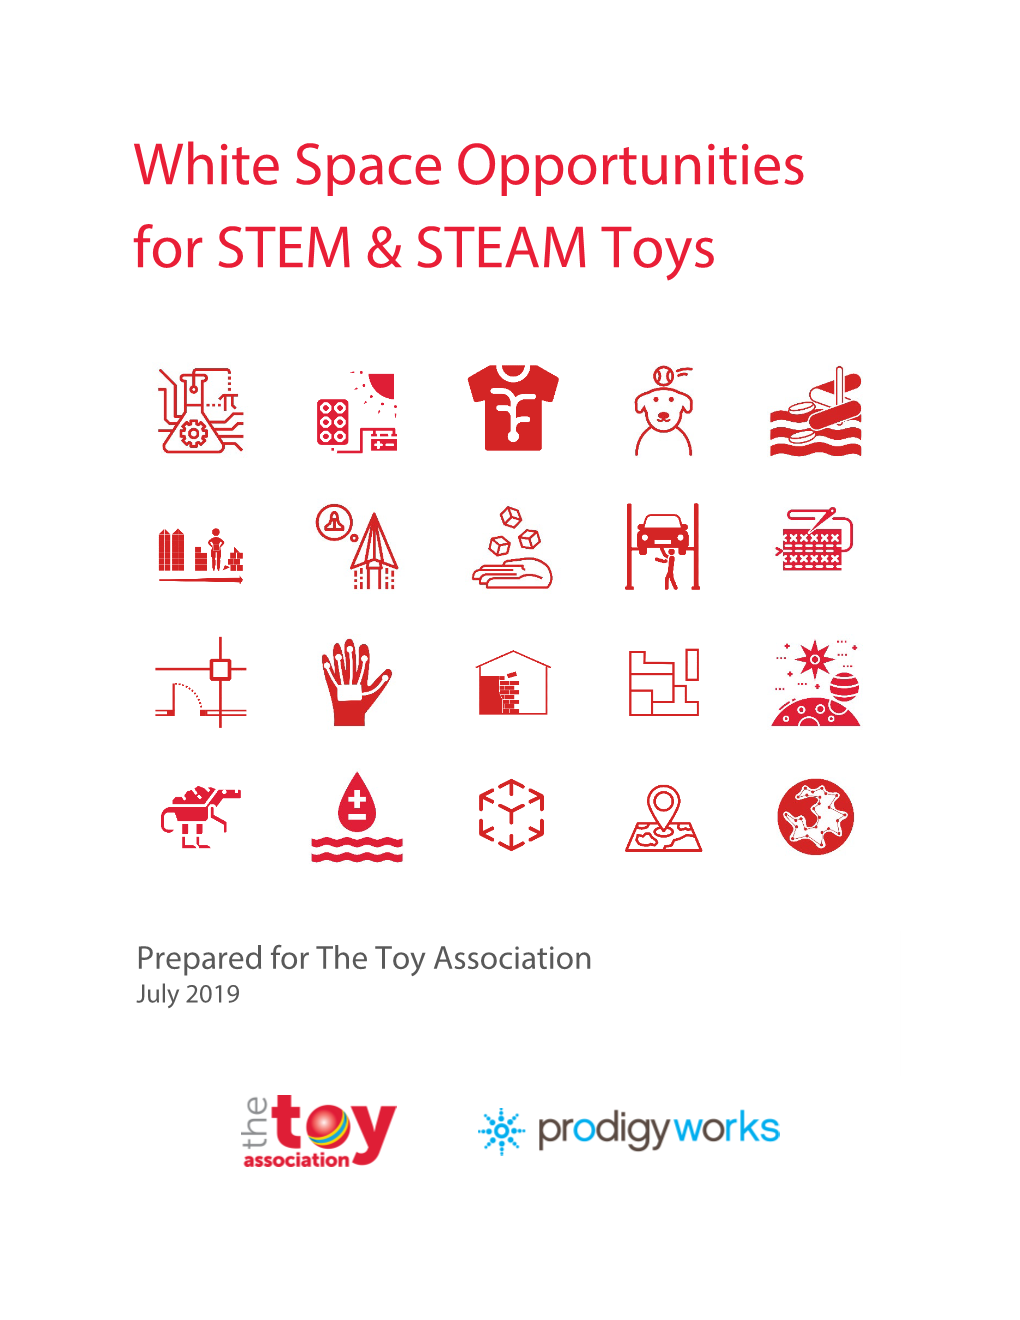 White Space Opportunities for STEM and STEAM Toys Page 2 of 60 Juy 2019 Discovery and Imagination 16